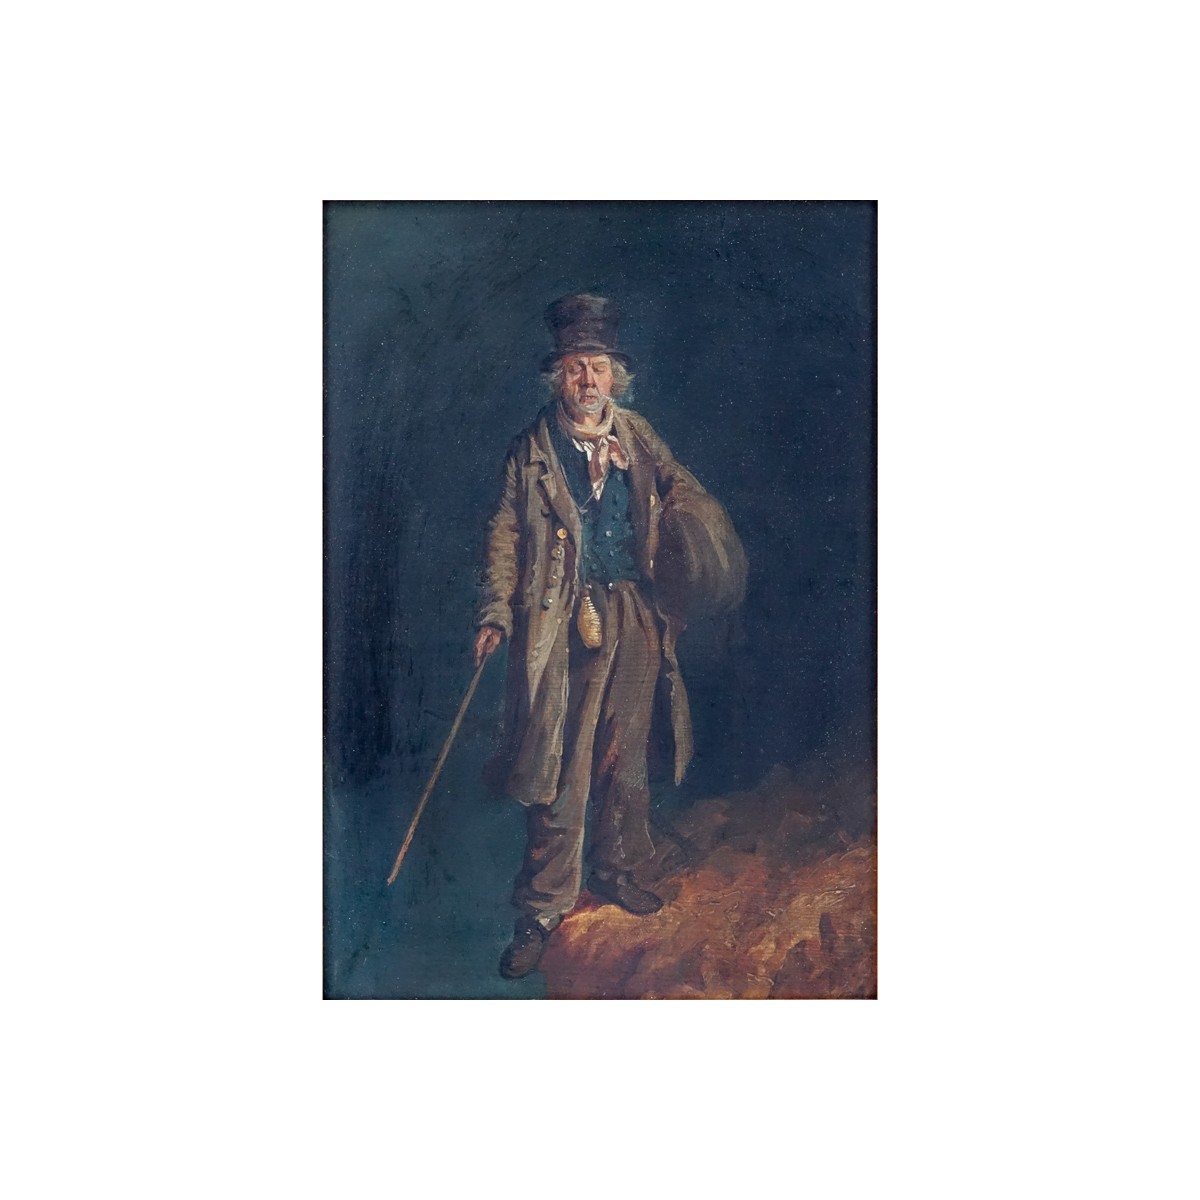 Attributed to: John Carlin, American (1813 - 1891) Oil on canvas "Beggar on the brink of  disaster"